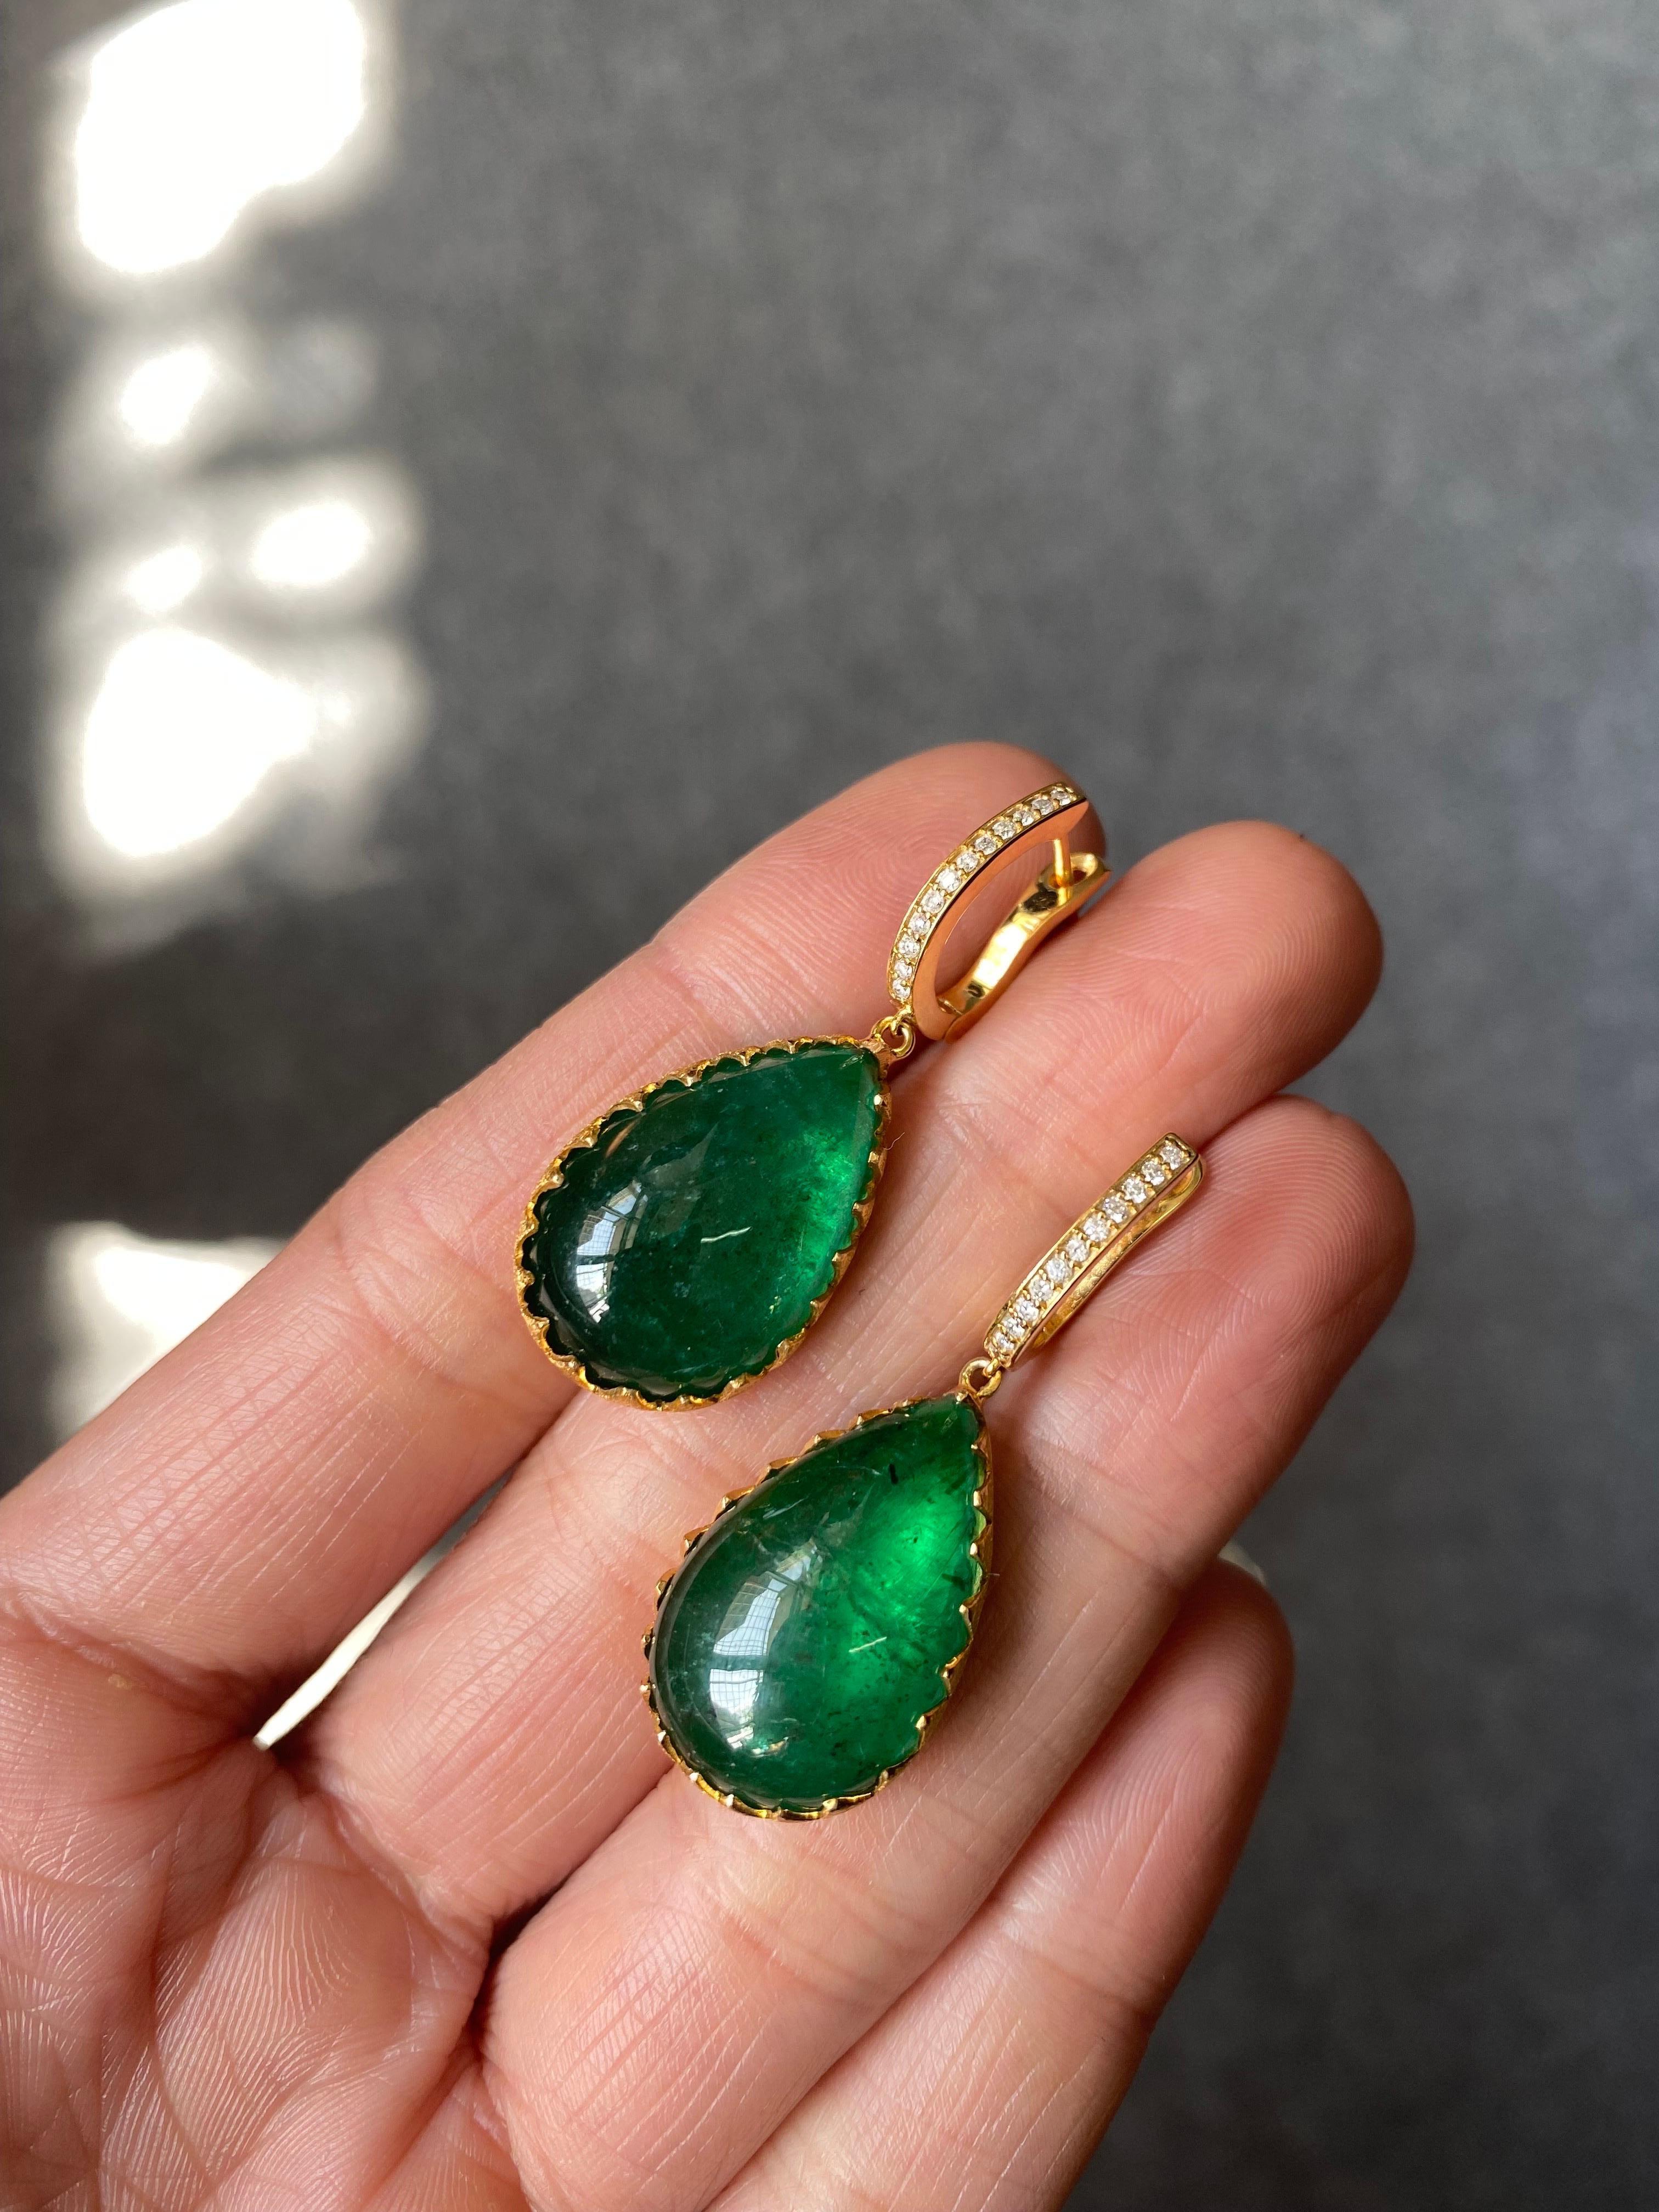 A beautiful pair of classic 28.61 carat pear shaped cabochon Zambian Emeralds set in solid matte finish 18K Yellow Gold, with VS quality White Diamonds. The Emeralds are completely transparent, with an eye-catching vivid green color and great